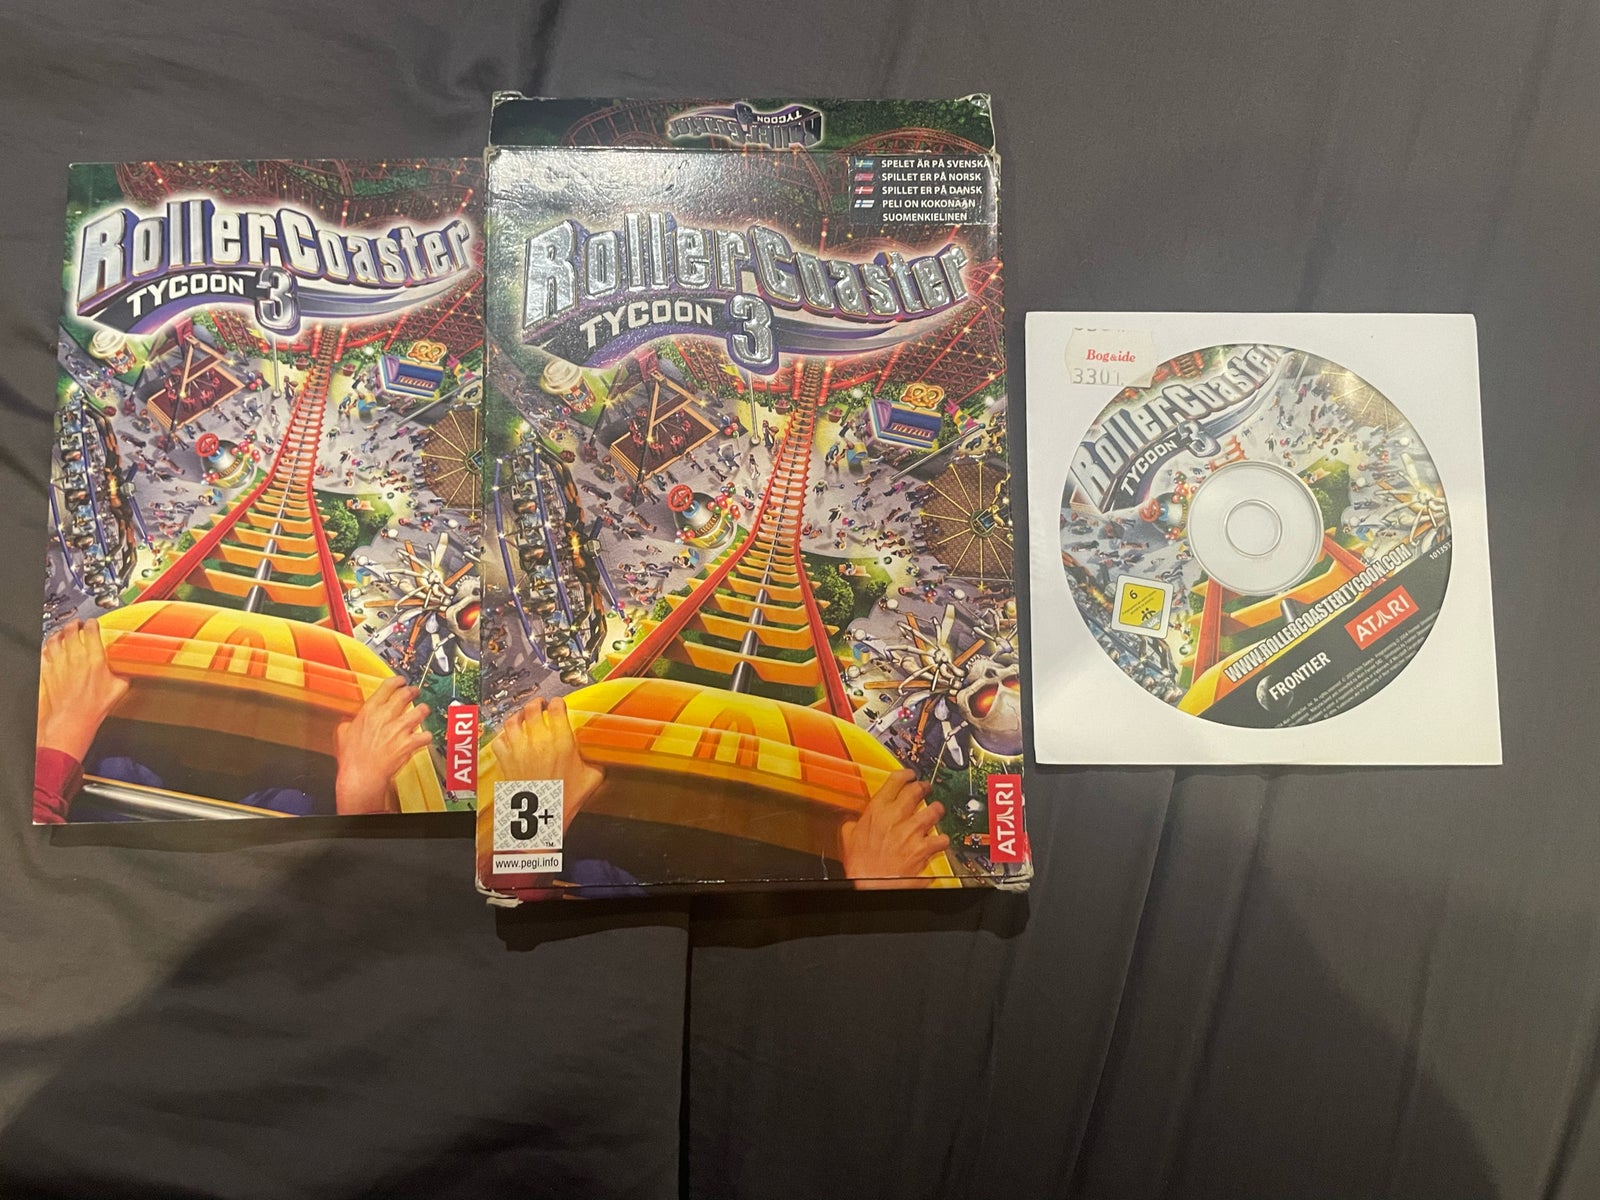 Rollercoaster tycoon 3, til pc, simulation